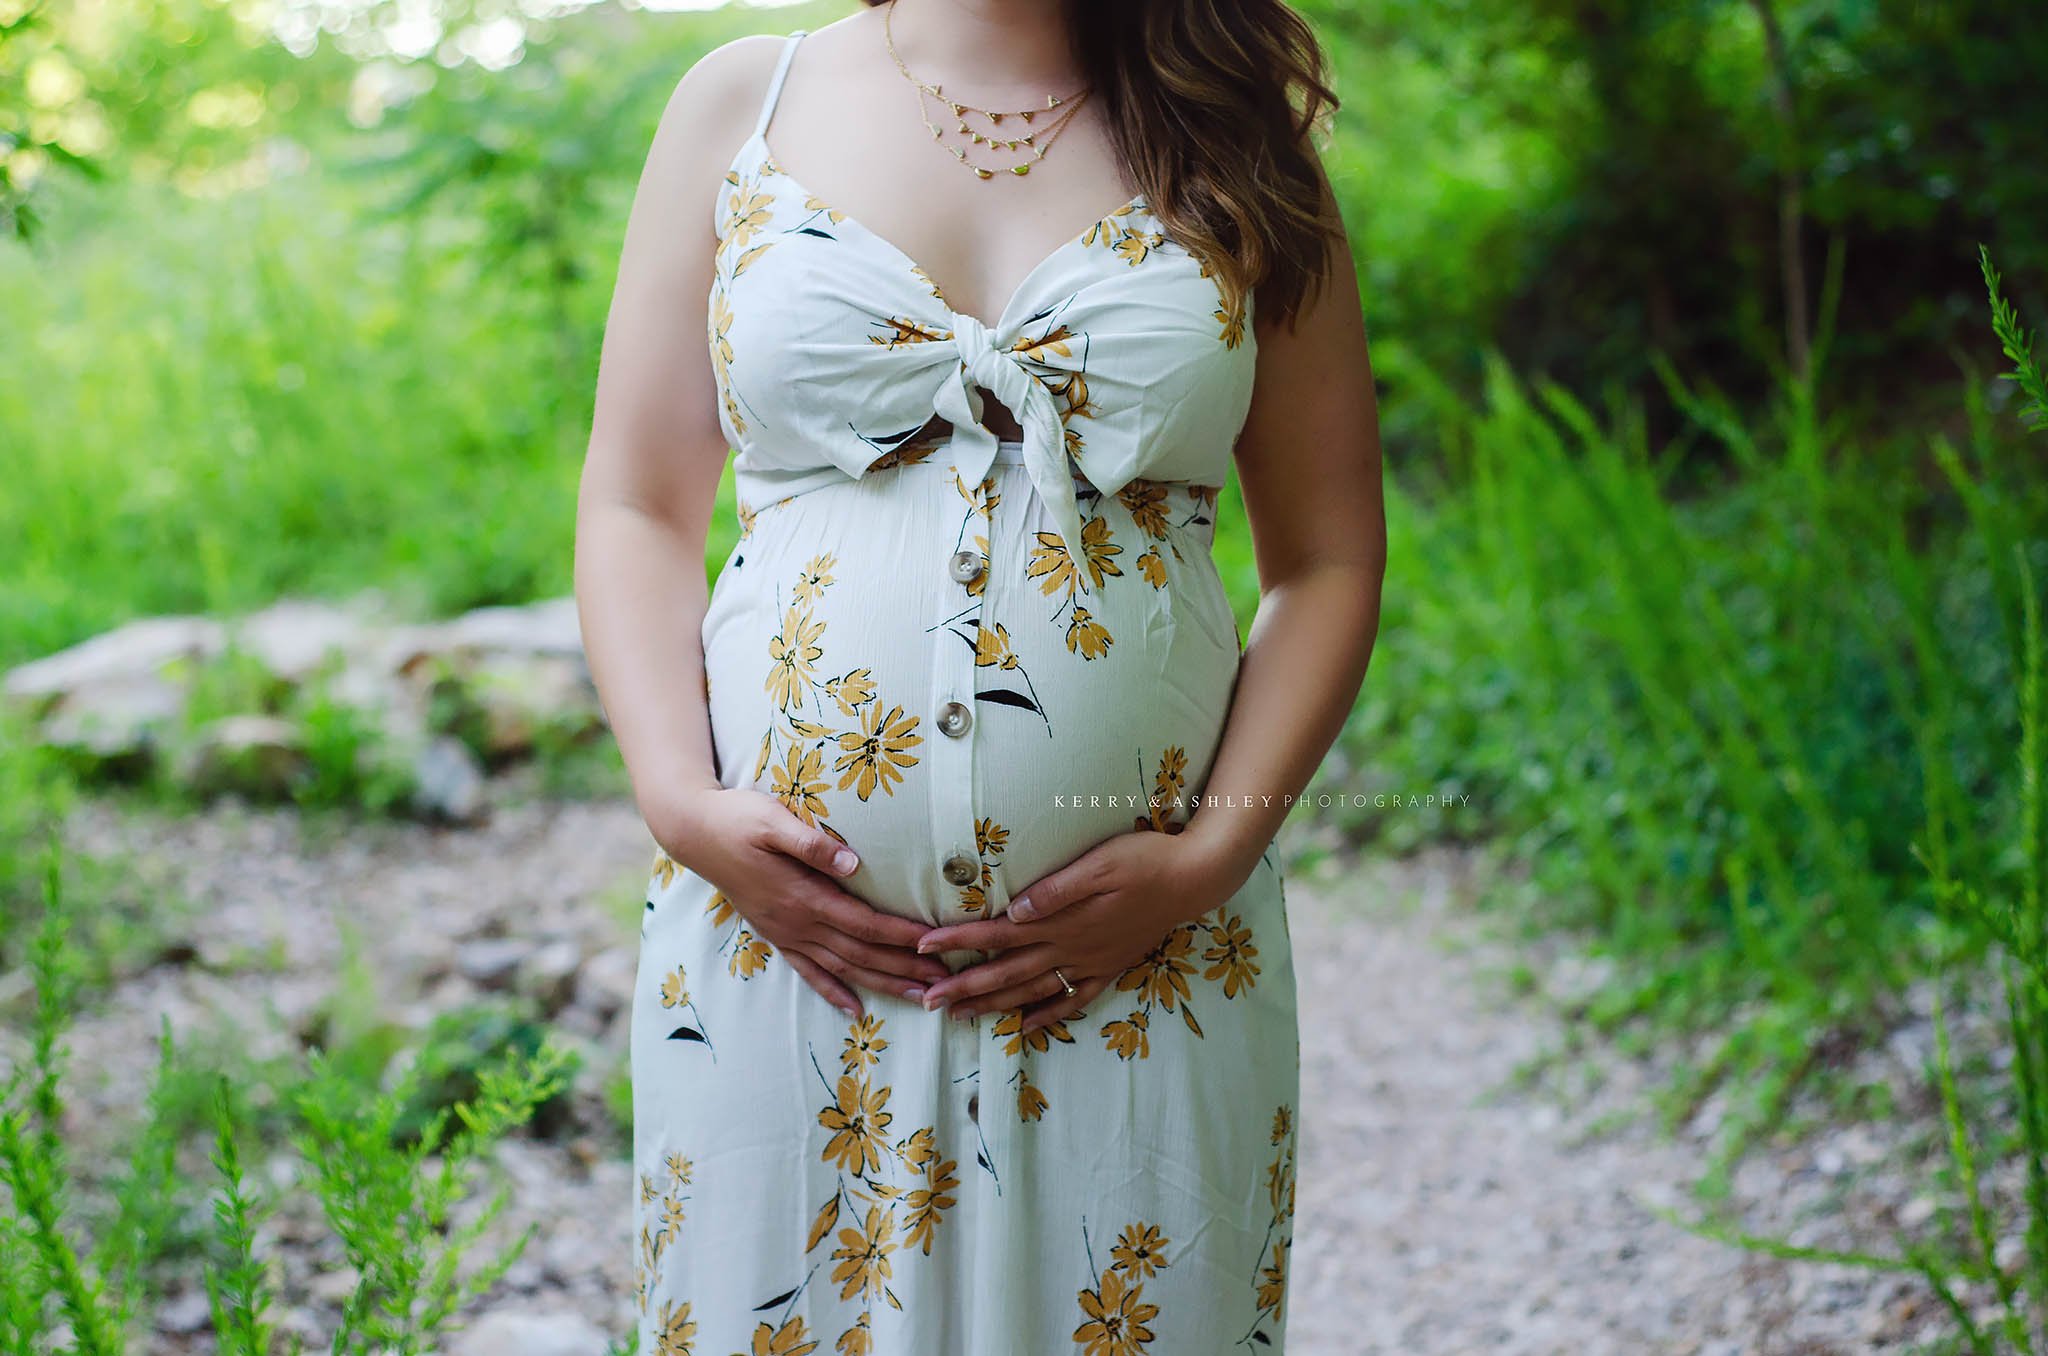 pregnant-woman-holding-belly.jpg